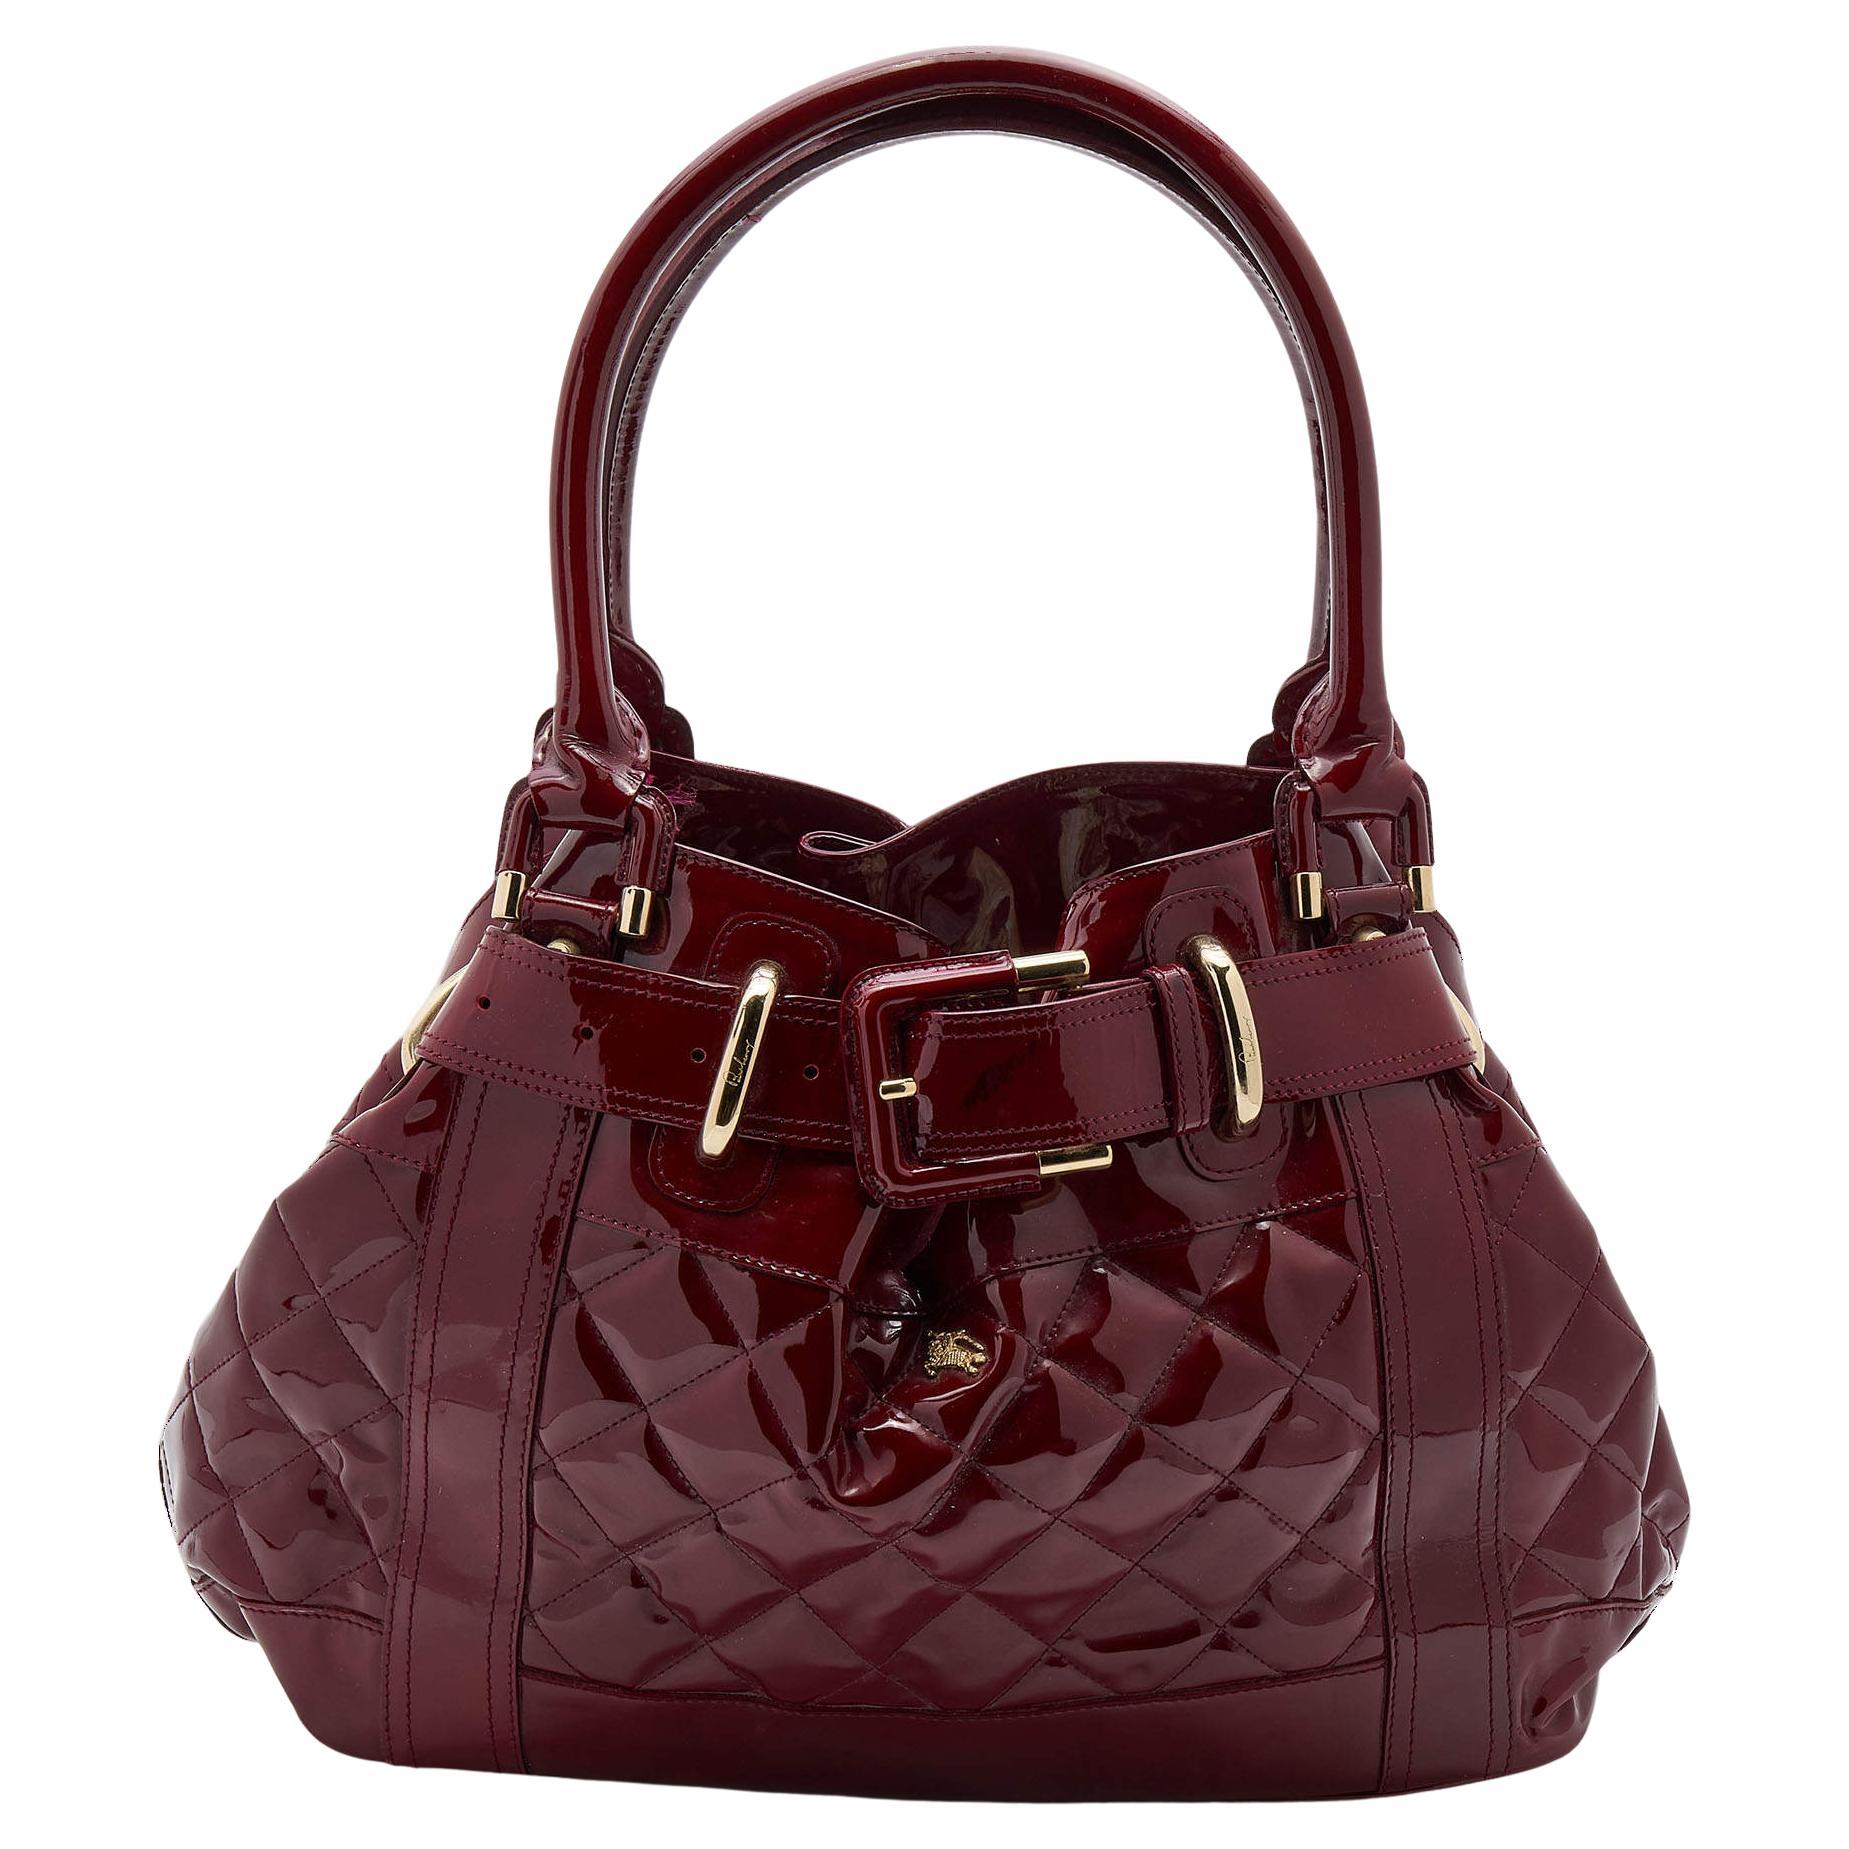 Burberry Red Patent Leather Quilted Prorsum Beaton Tote